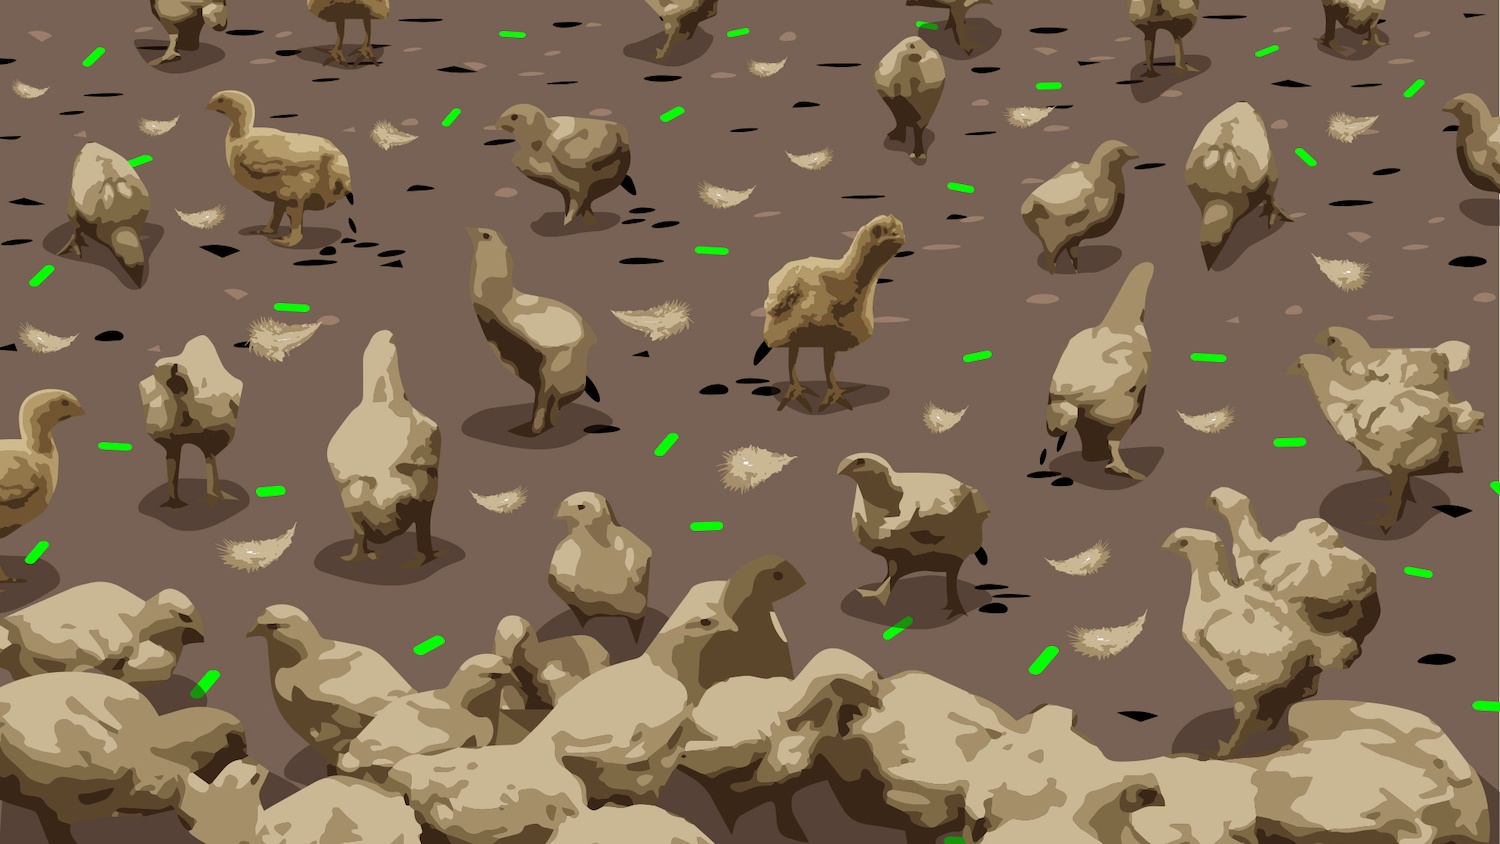 Illustration of crowded chickens eating soiled seed 110821.